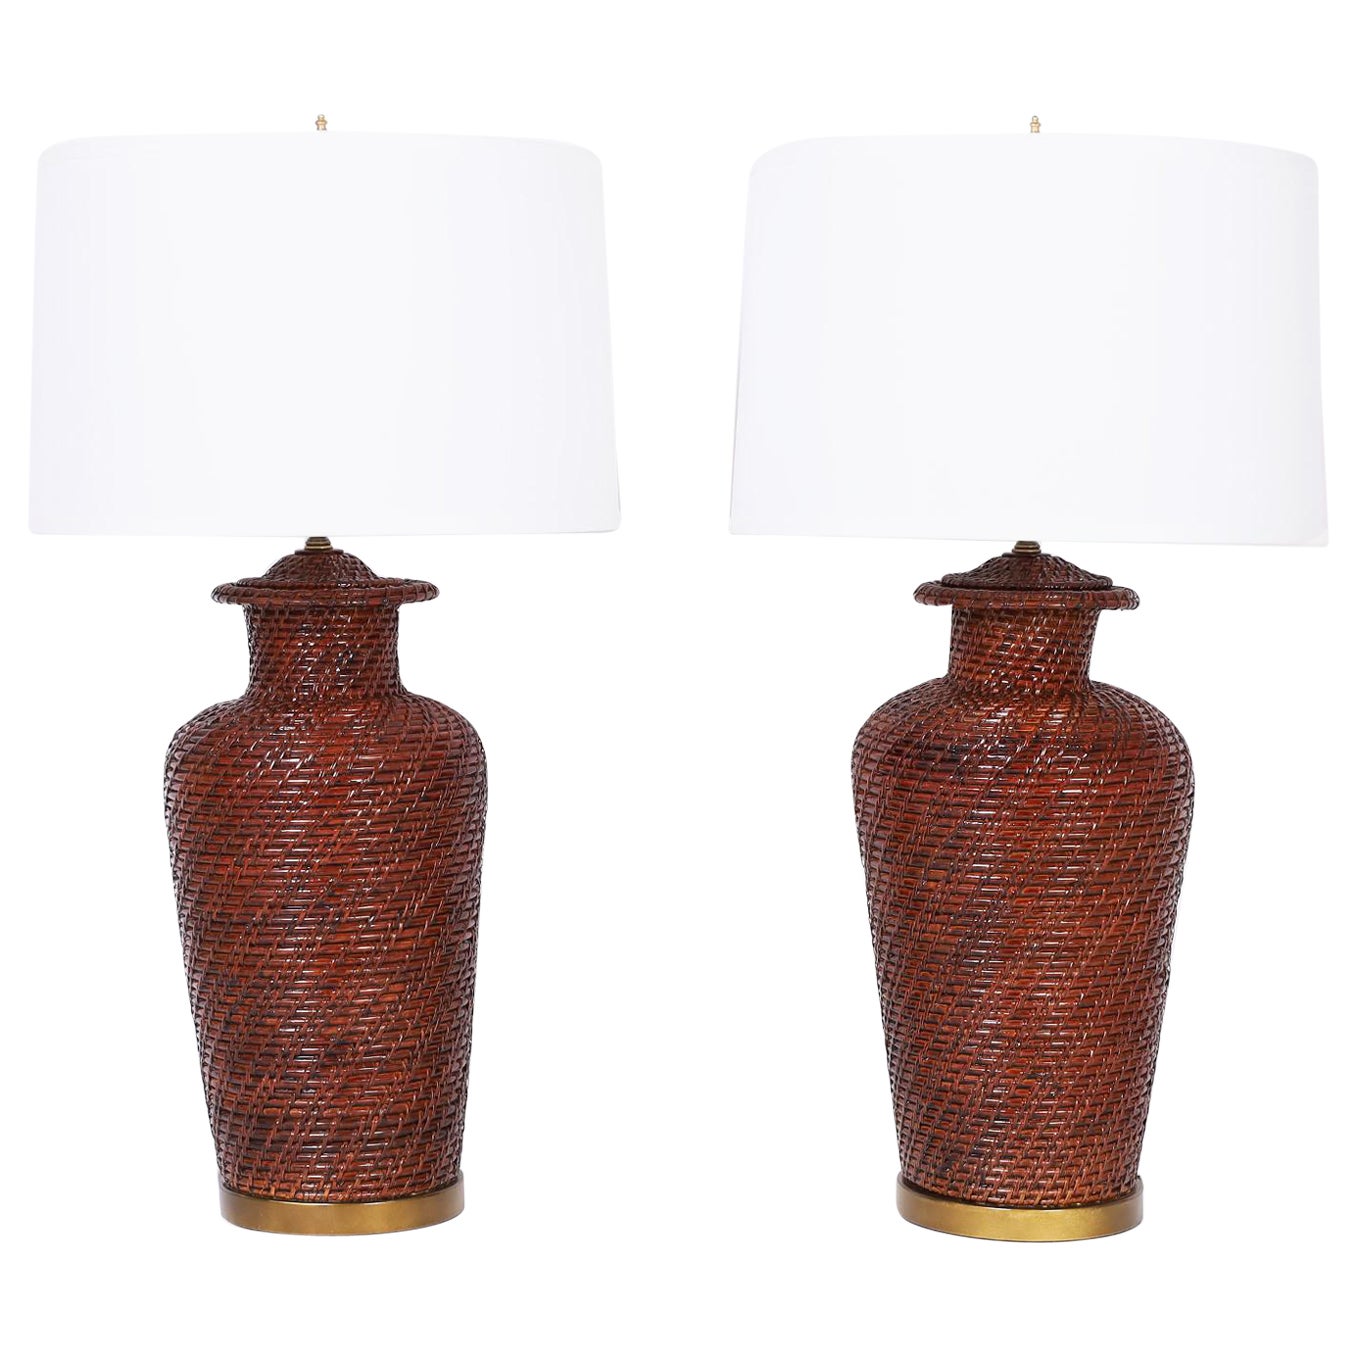 Pair of Asian Modern Wicker Table Lamps